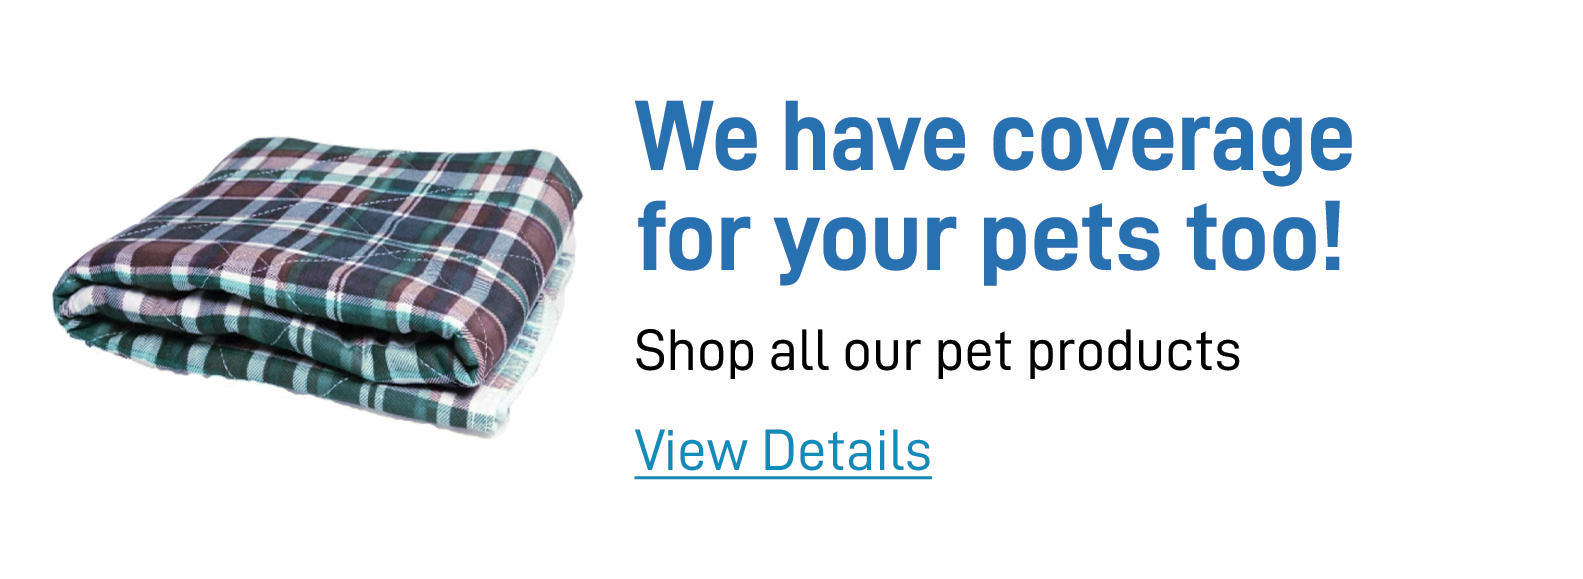 We have coverage for your pets too!